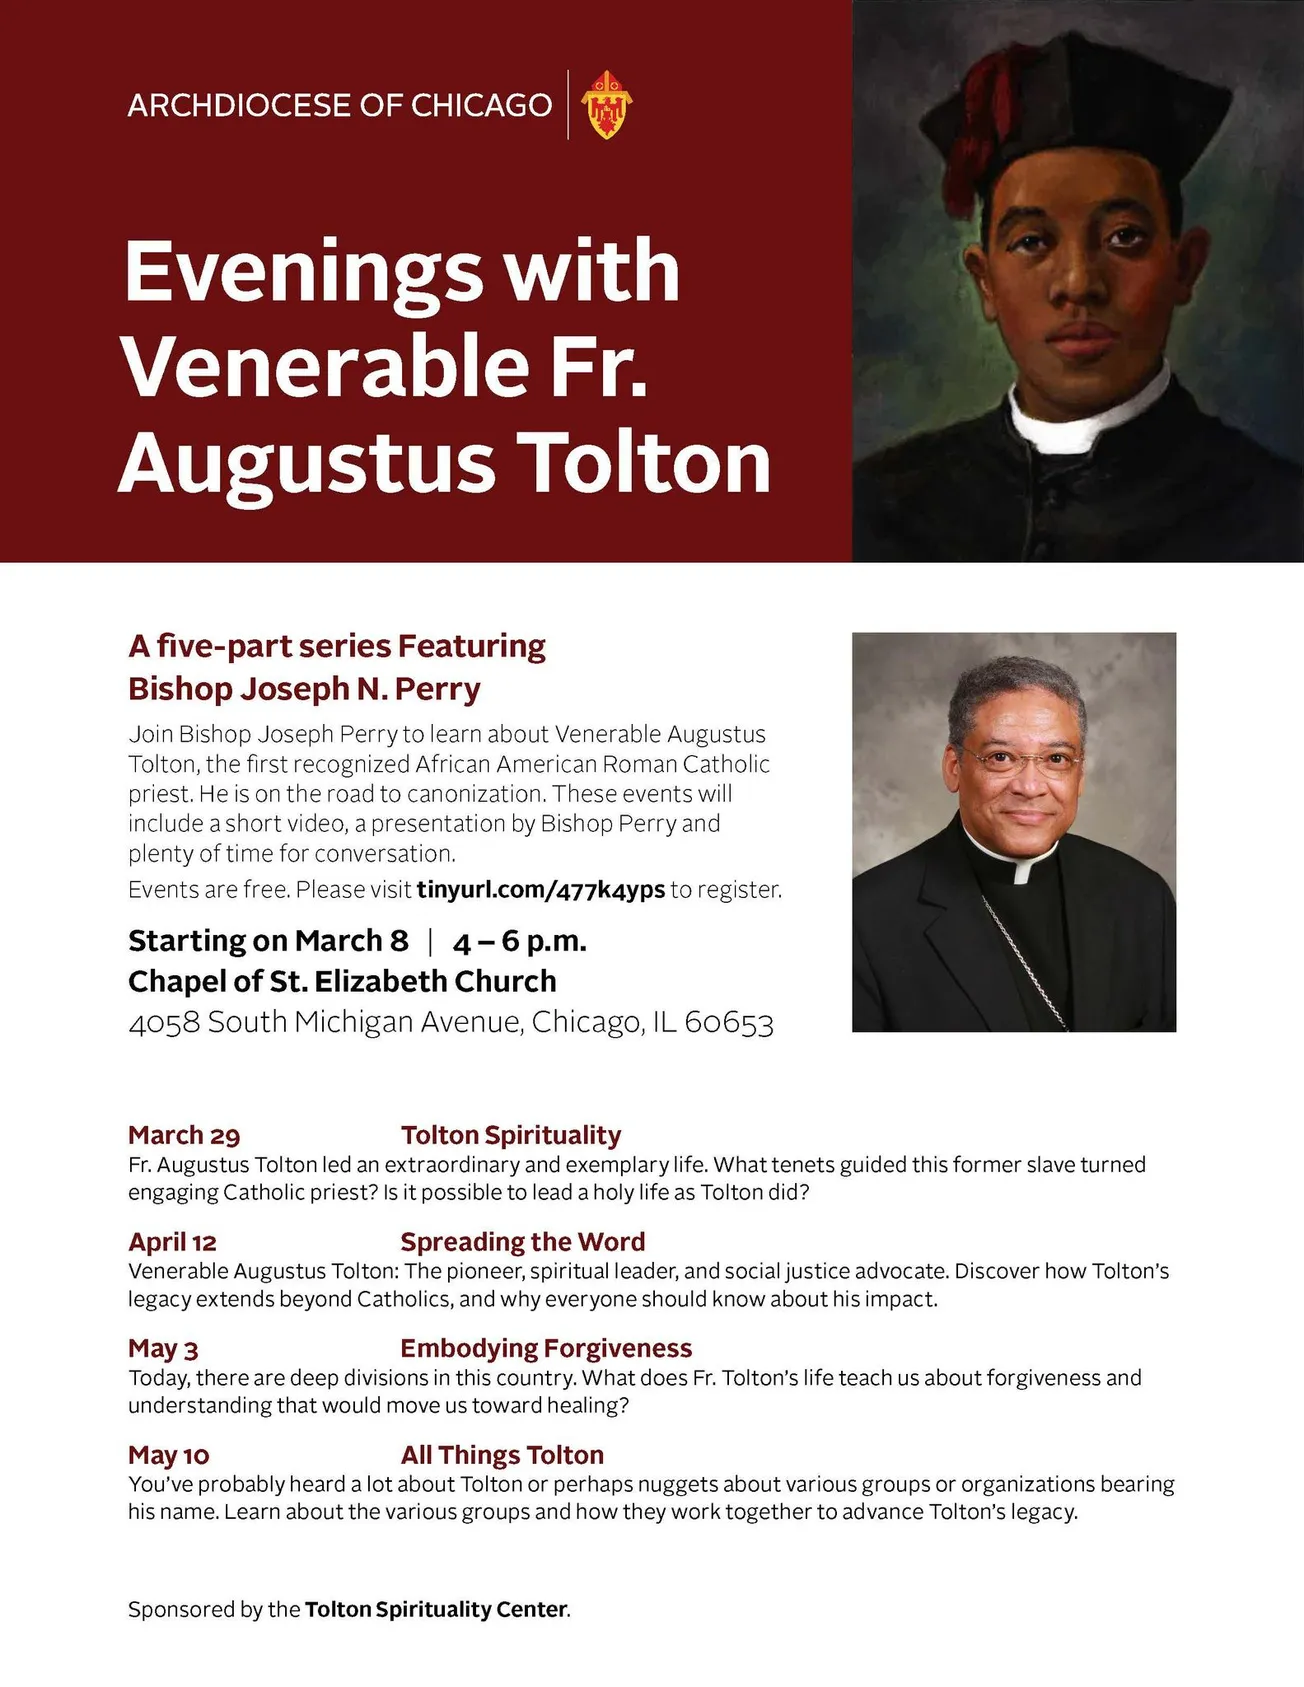 5-part series on Ven. Augustus Tolton continues Wednesday with Bishop Joseph N. Perry